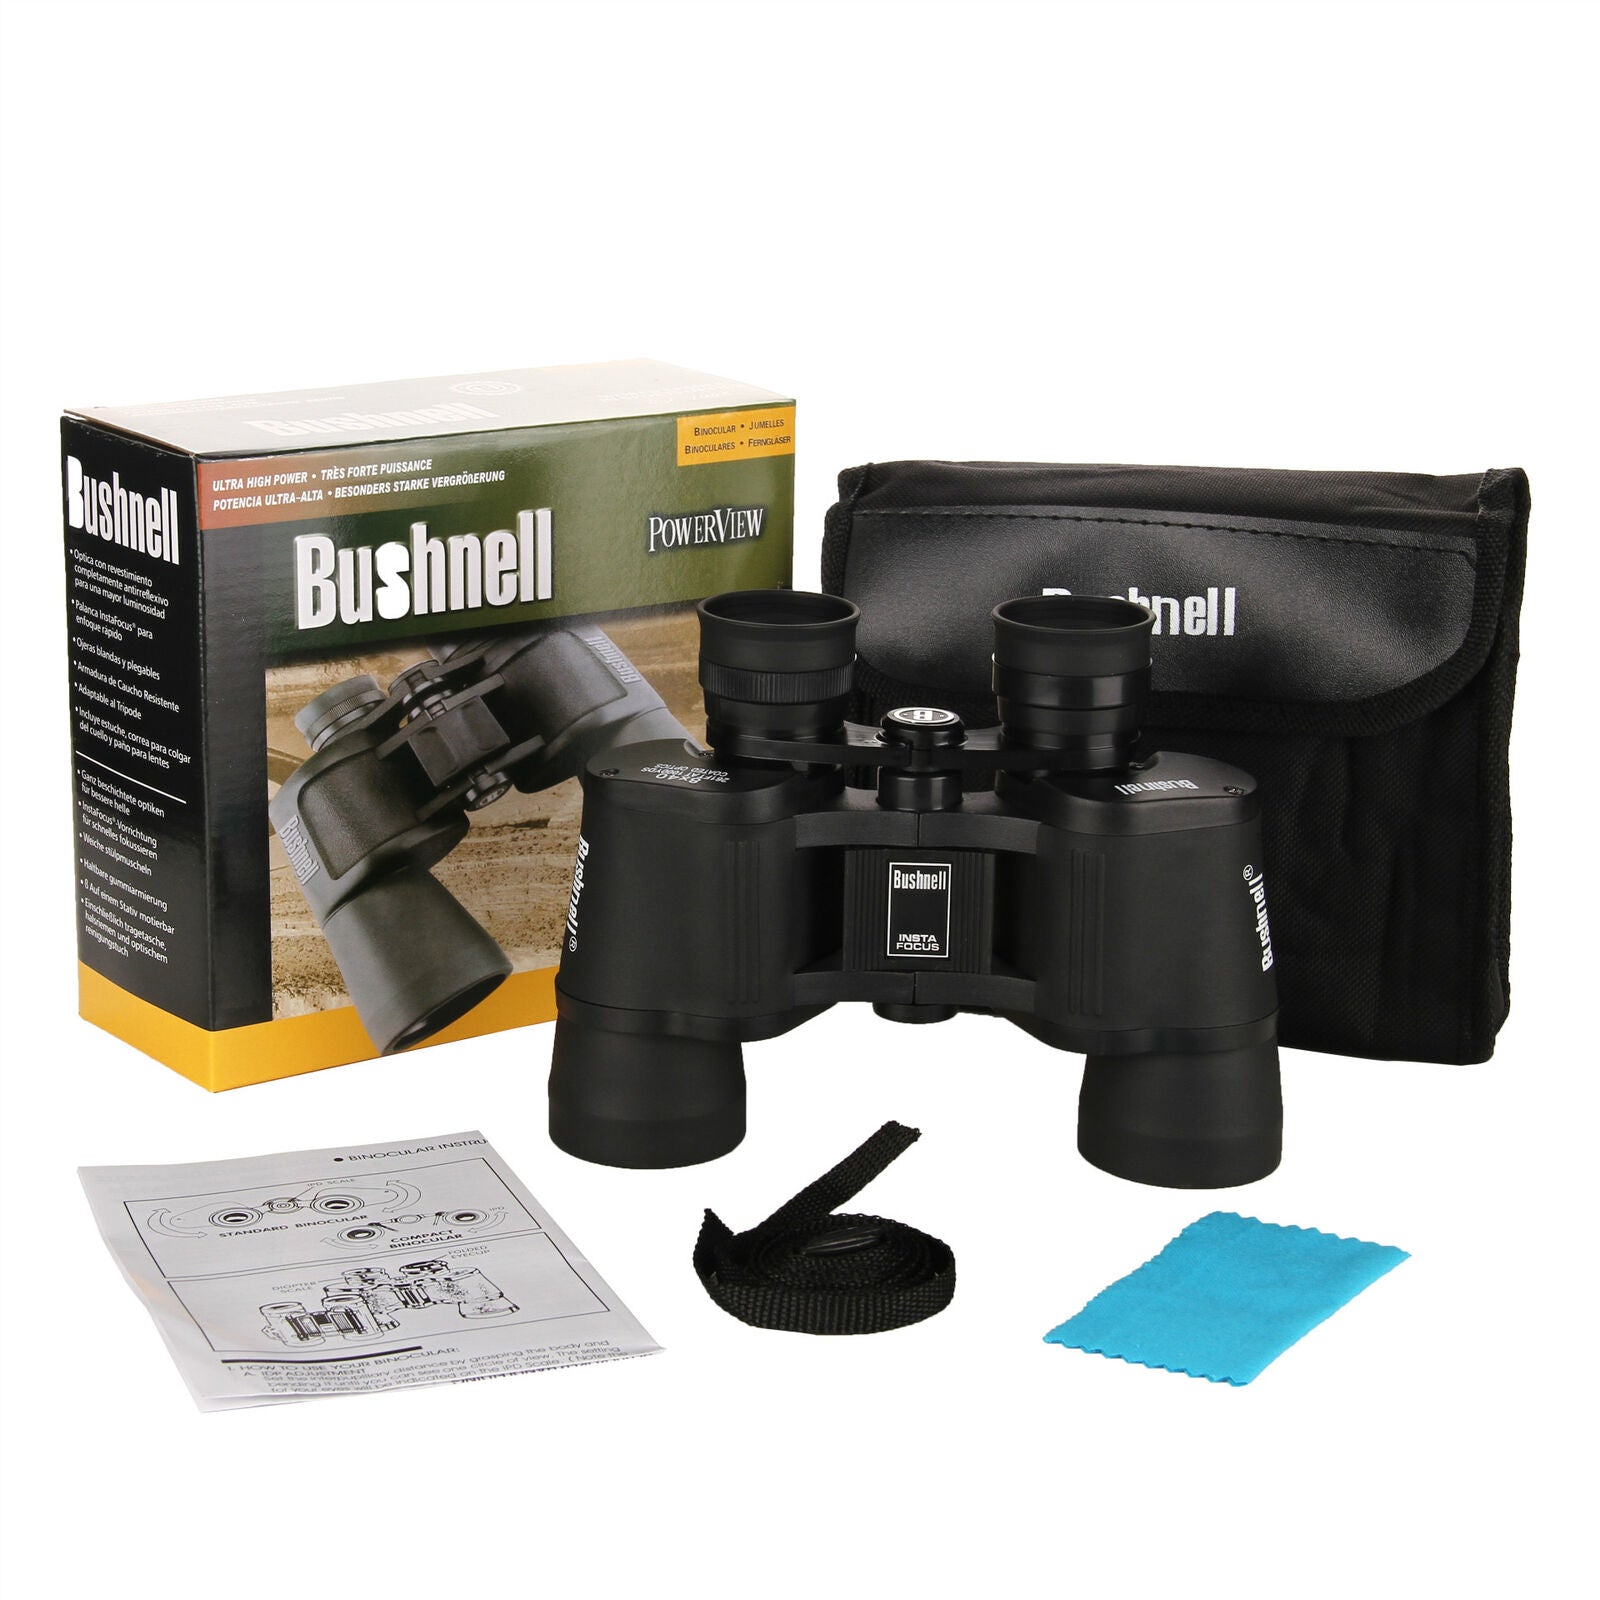 Bushnell 8x40 Common Telescope High Magnification Binoculars Outdoor Portable